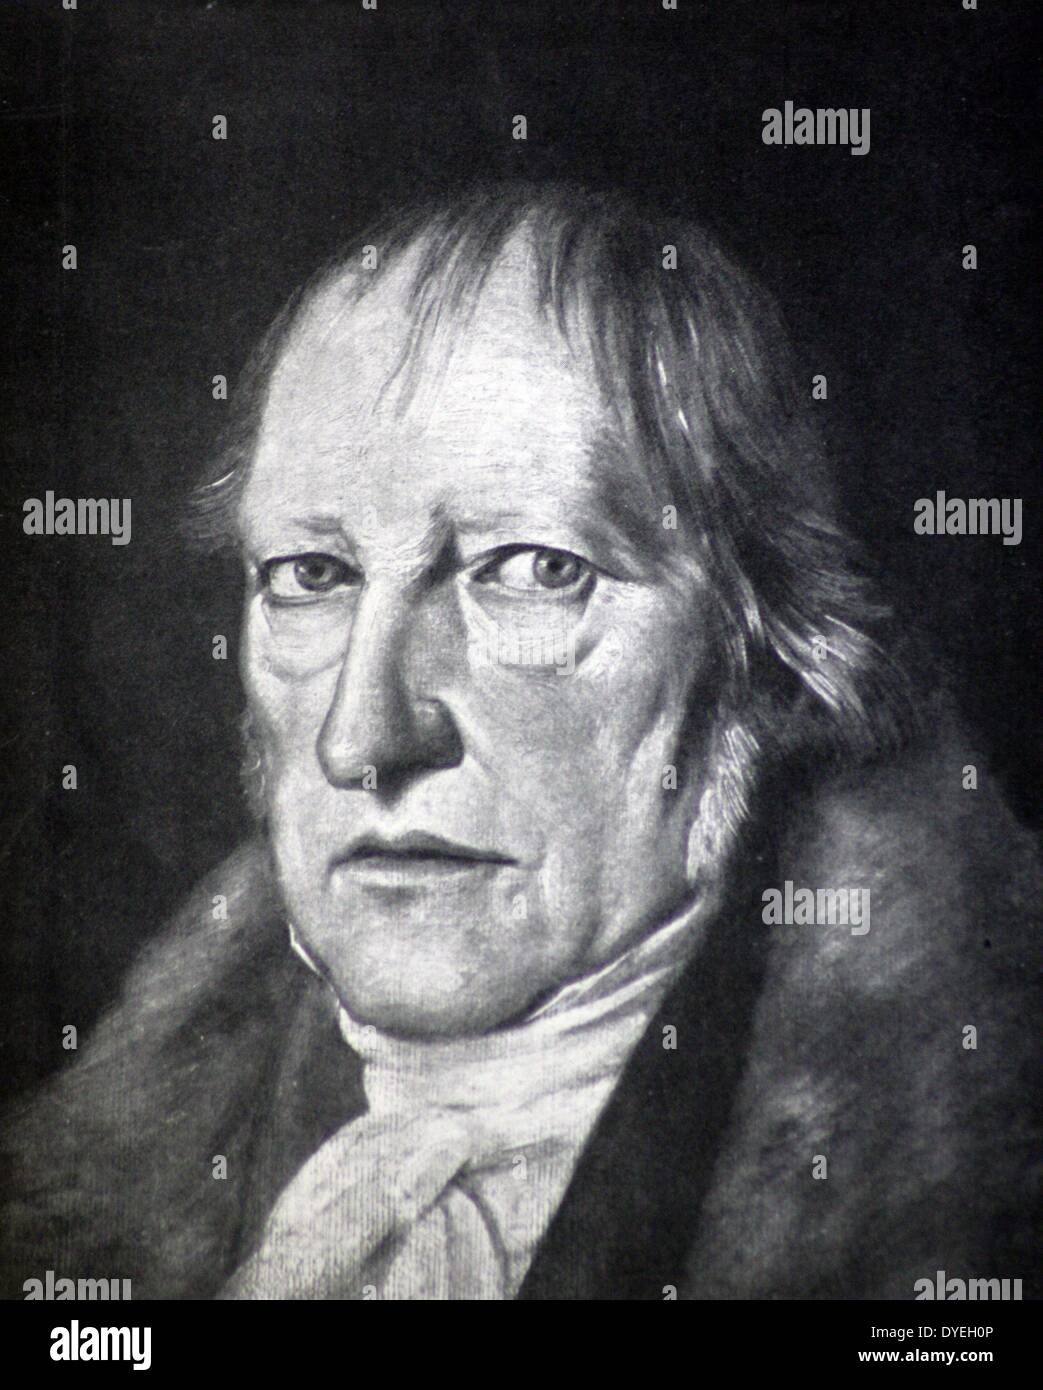 Georg Wilhelm Friedrich Hegel (1770-1831) was a German philosopher and a major figure in German idealism. His historicist and idealist account of reality revolutionized European philosophy and was an important precursor to Continental philosophy and Marxism. Stock Photo